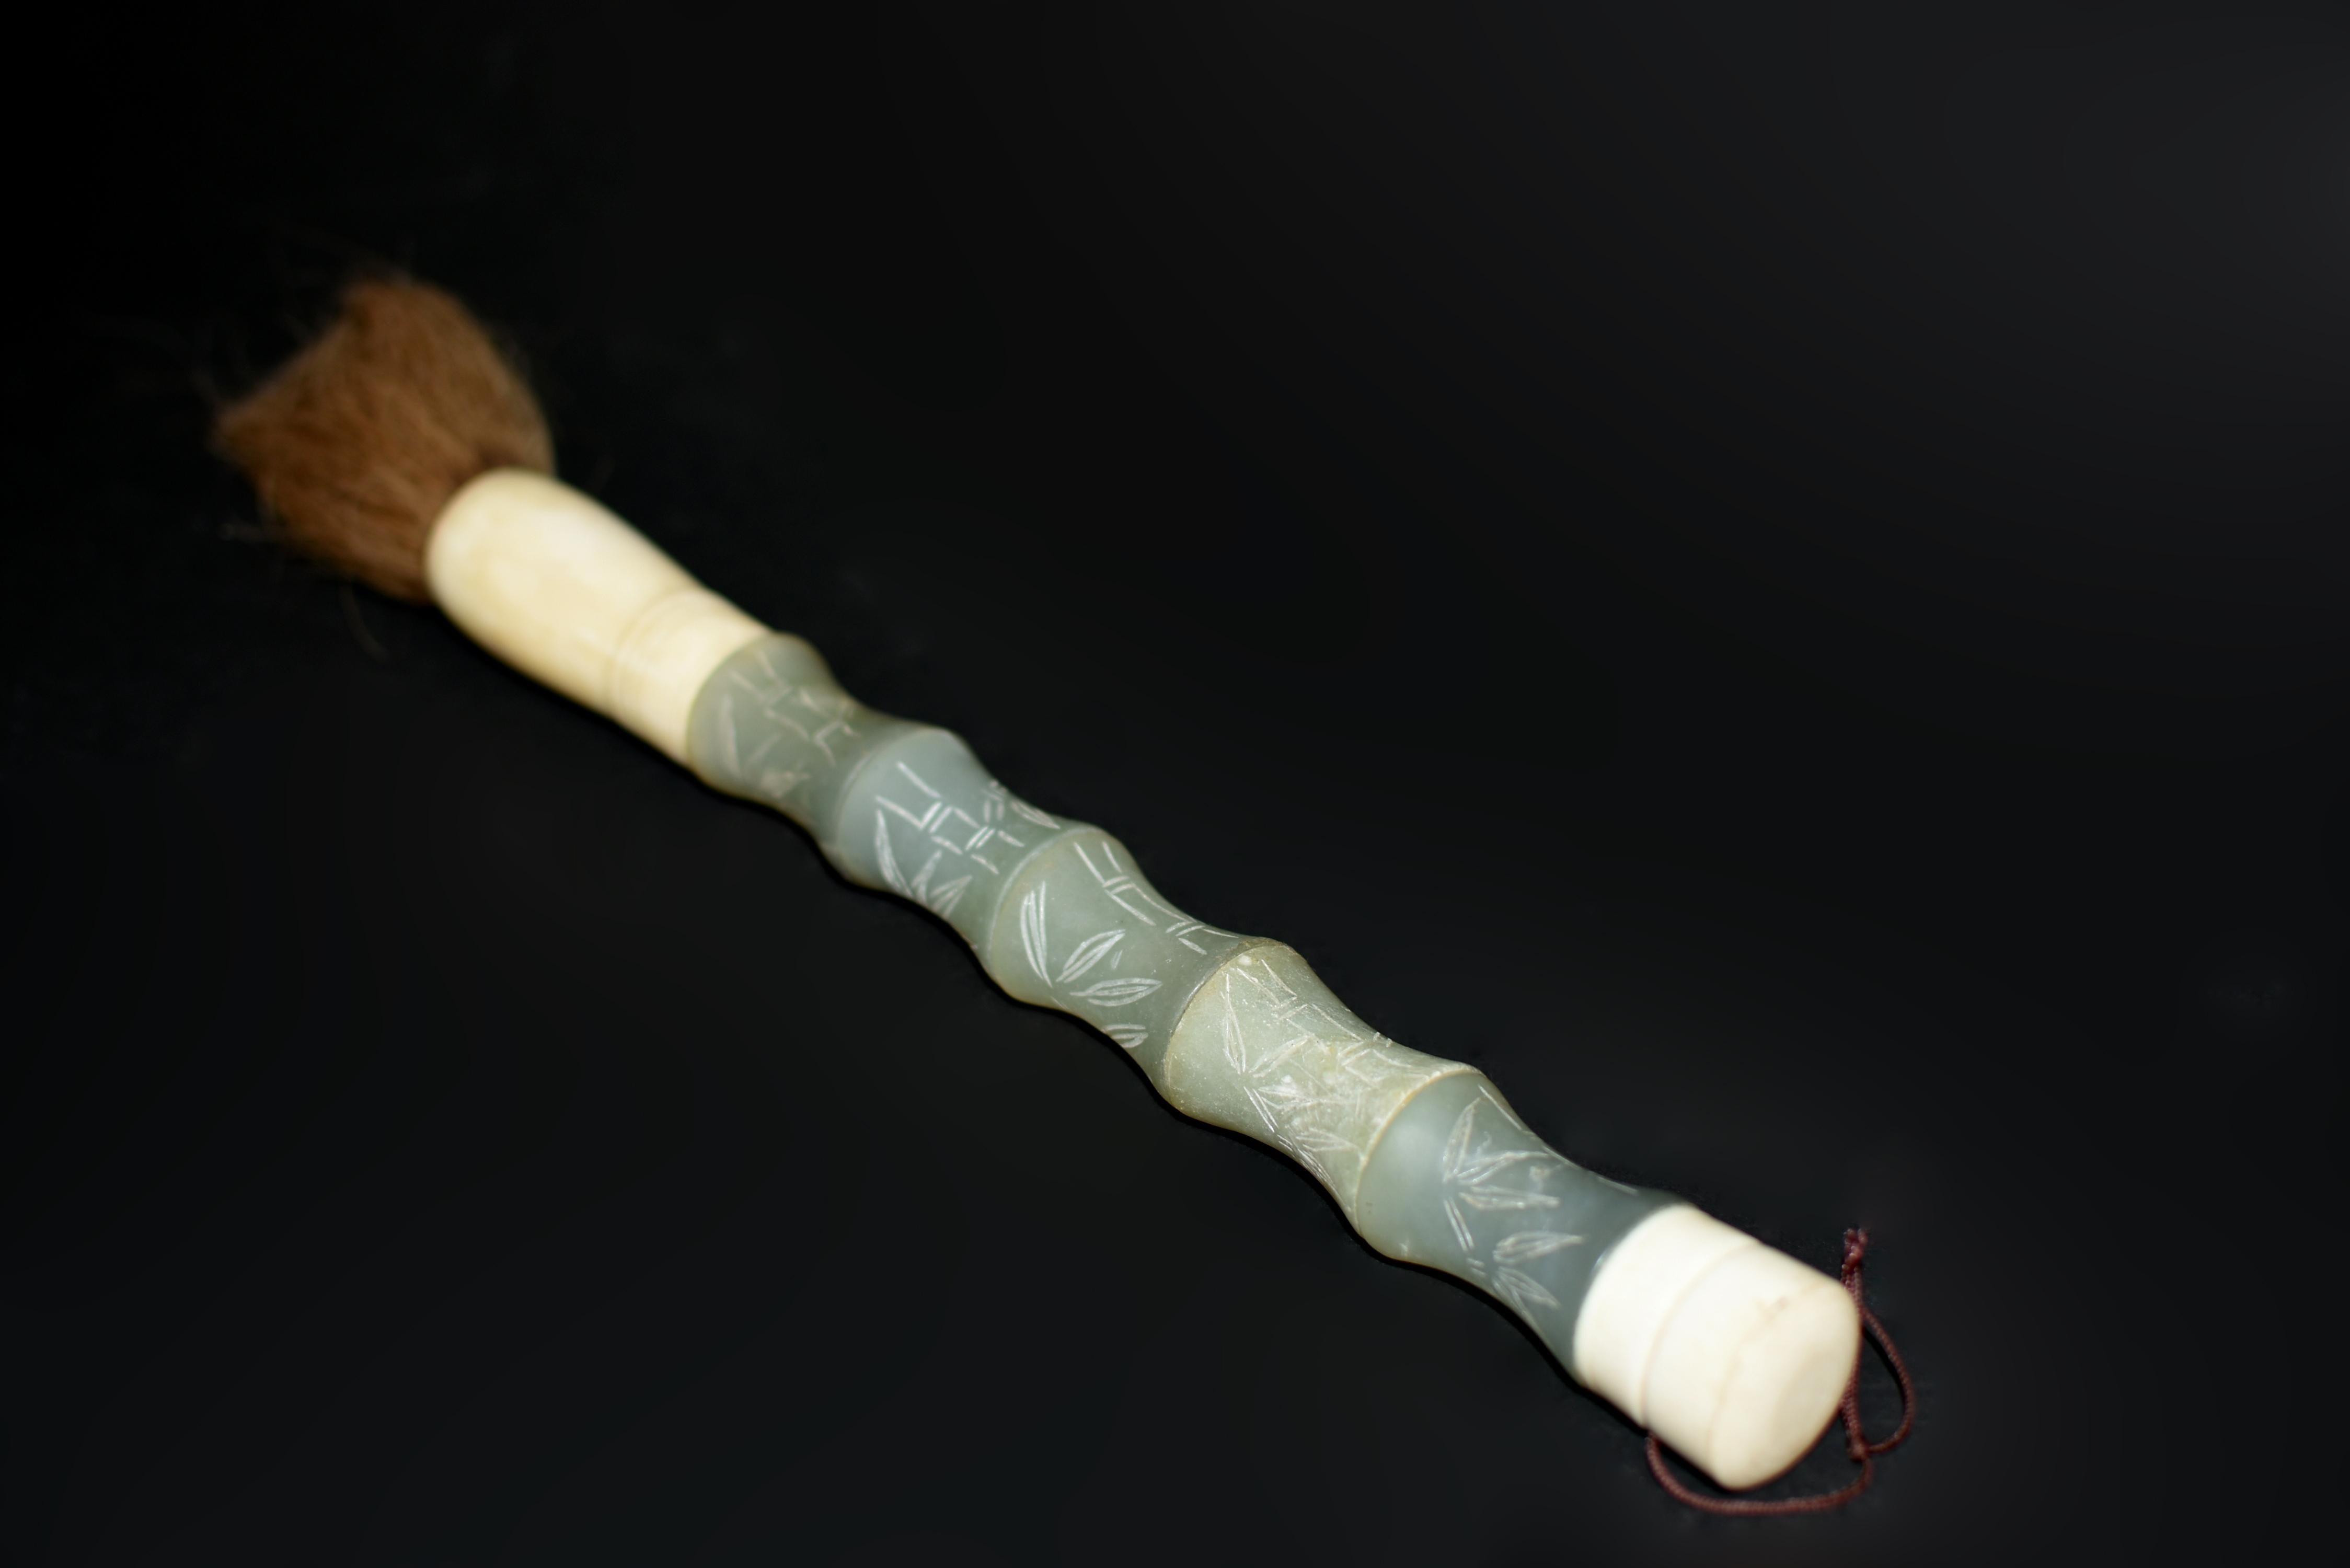 One of a kind, extra large, rare blue serpentine gemstone brush in bamboo form with carved bamboo leaves. Serpentine is a beautiful stone highly valued for its similarity to nephrite jade in its color and lustrous texture. Hand crafted with Bone